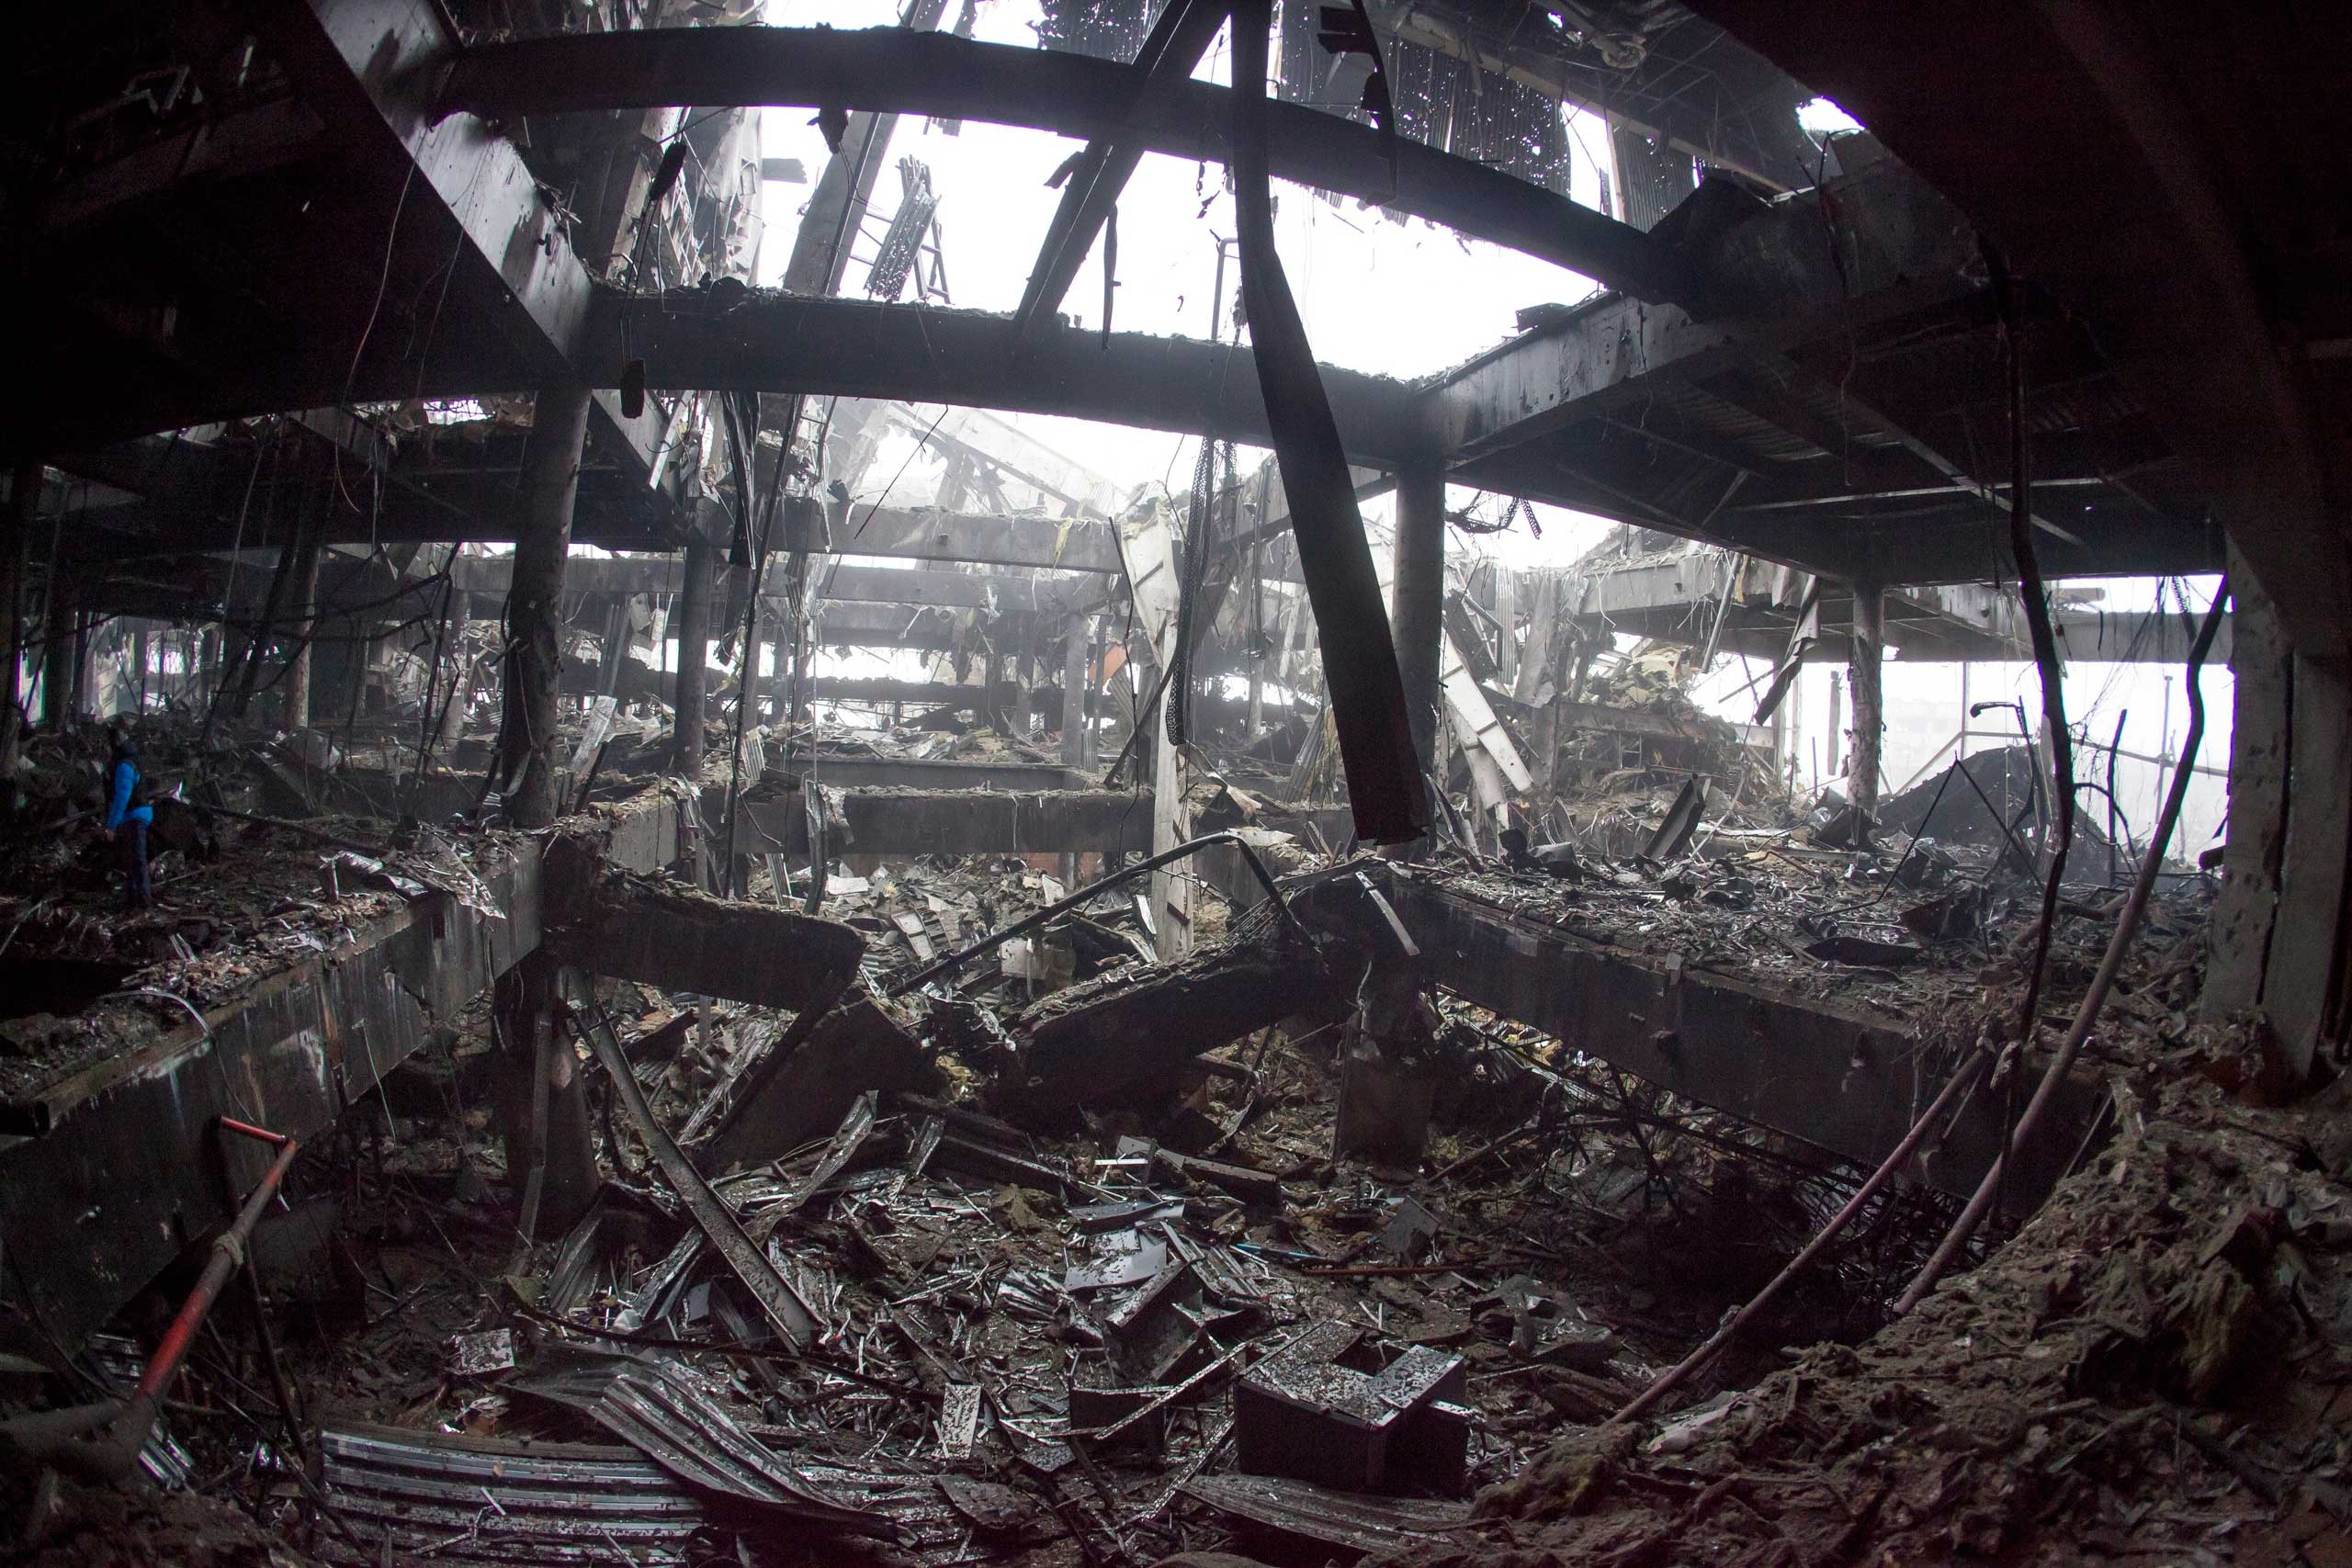 Inside the destroyed airport on Jan. 21, 2015.